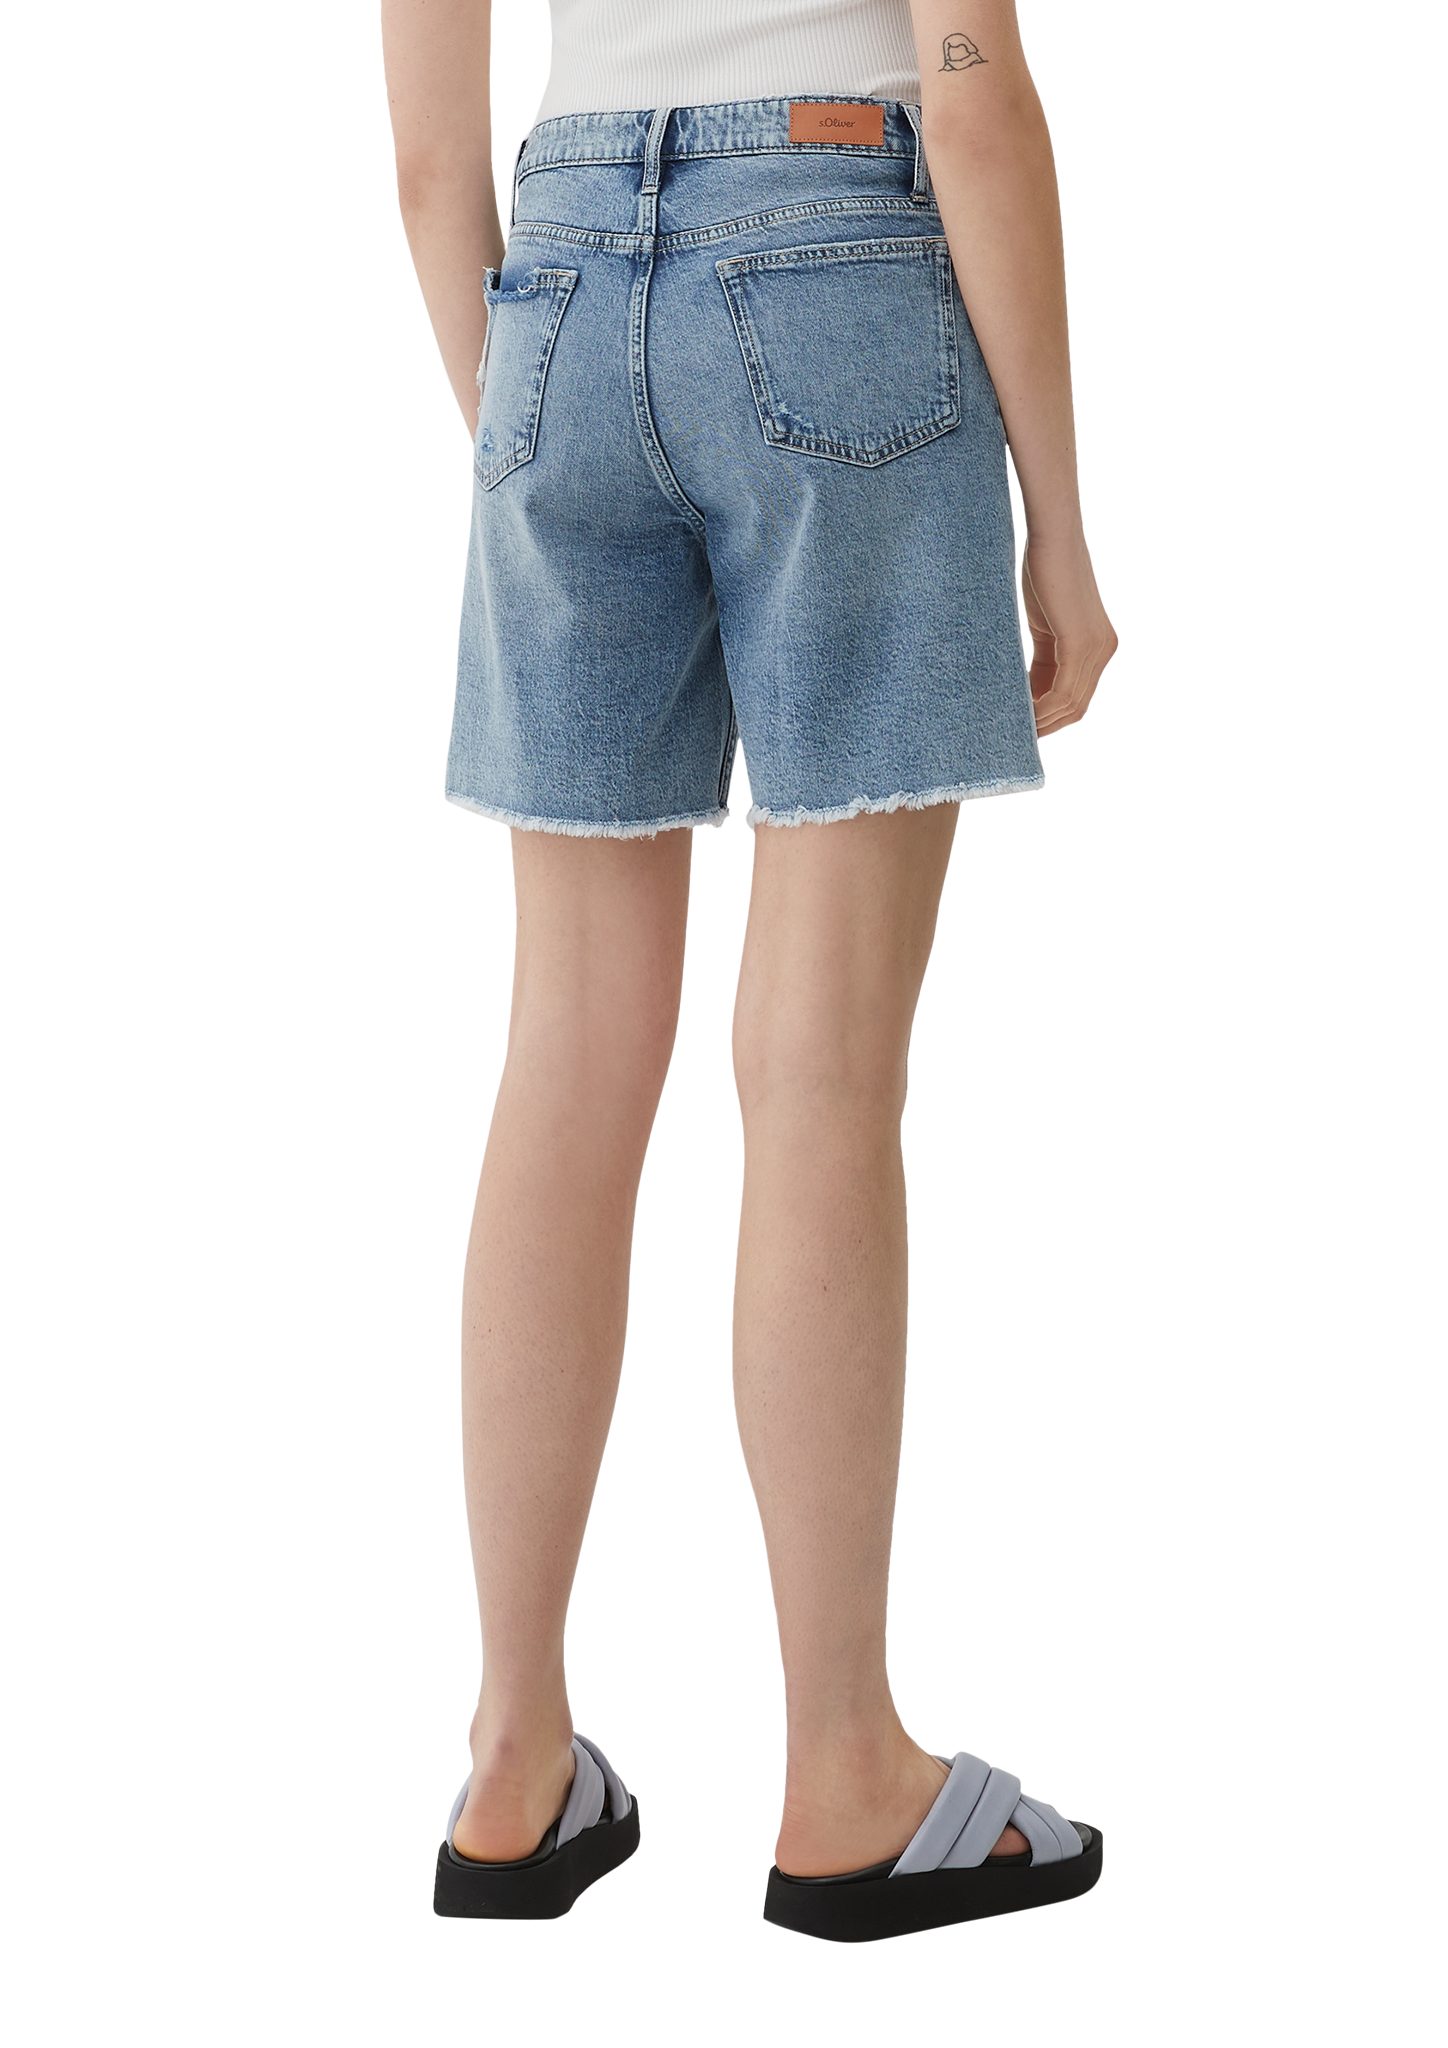 / Mid s.Oliver Jeans-Shorts Destroyes, Fit Relaxed Kontrast-Details / Leg Rise Waschung, Straight / Jeansshorts